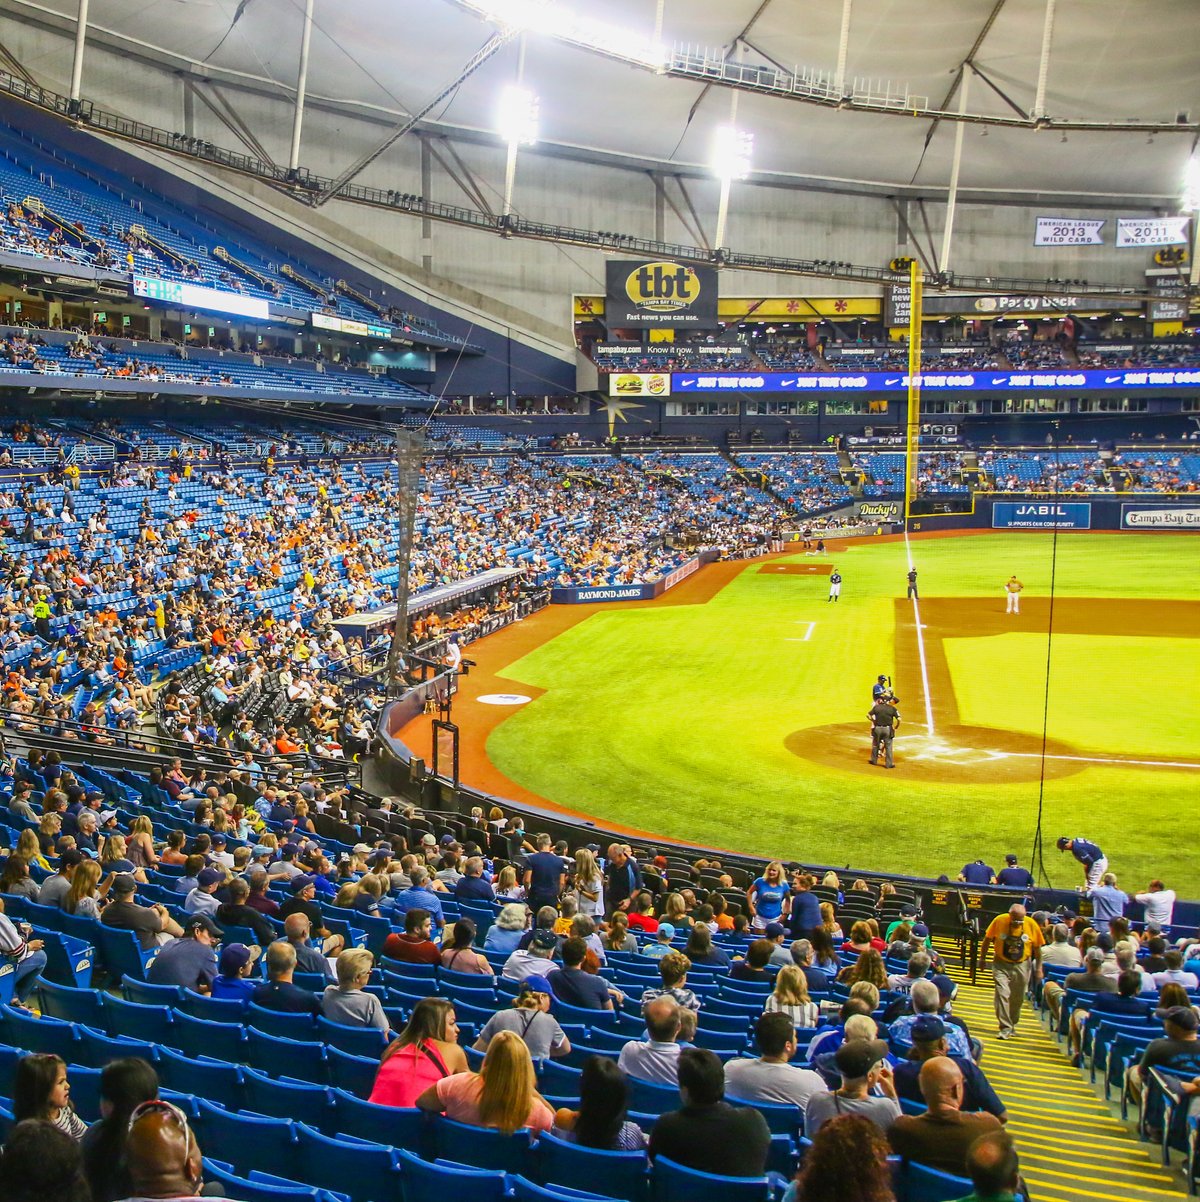 Tampa Bay Rays will close upper deck seating at Tropicana Field